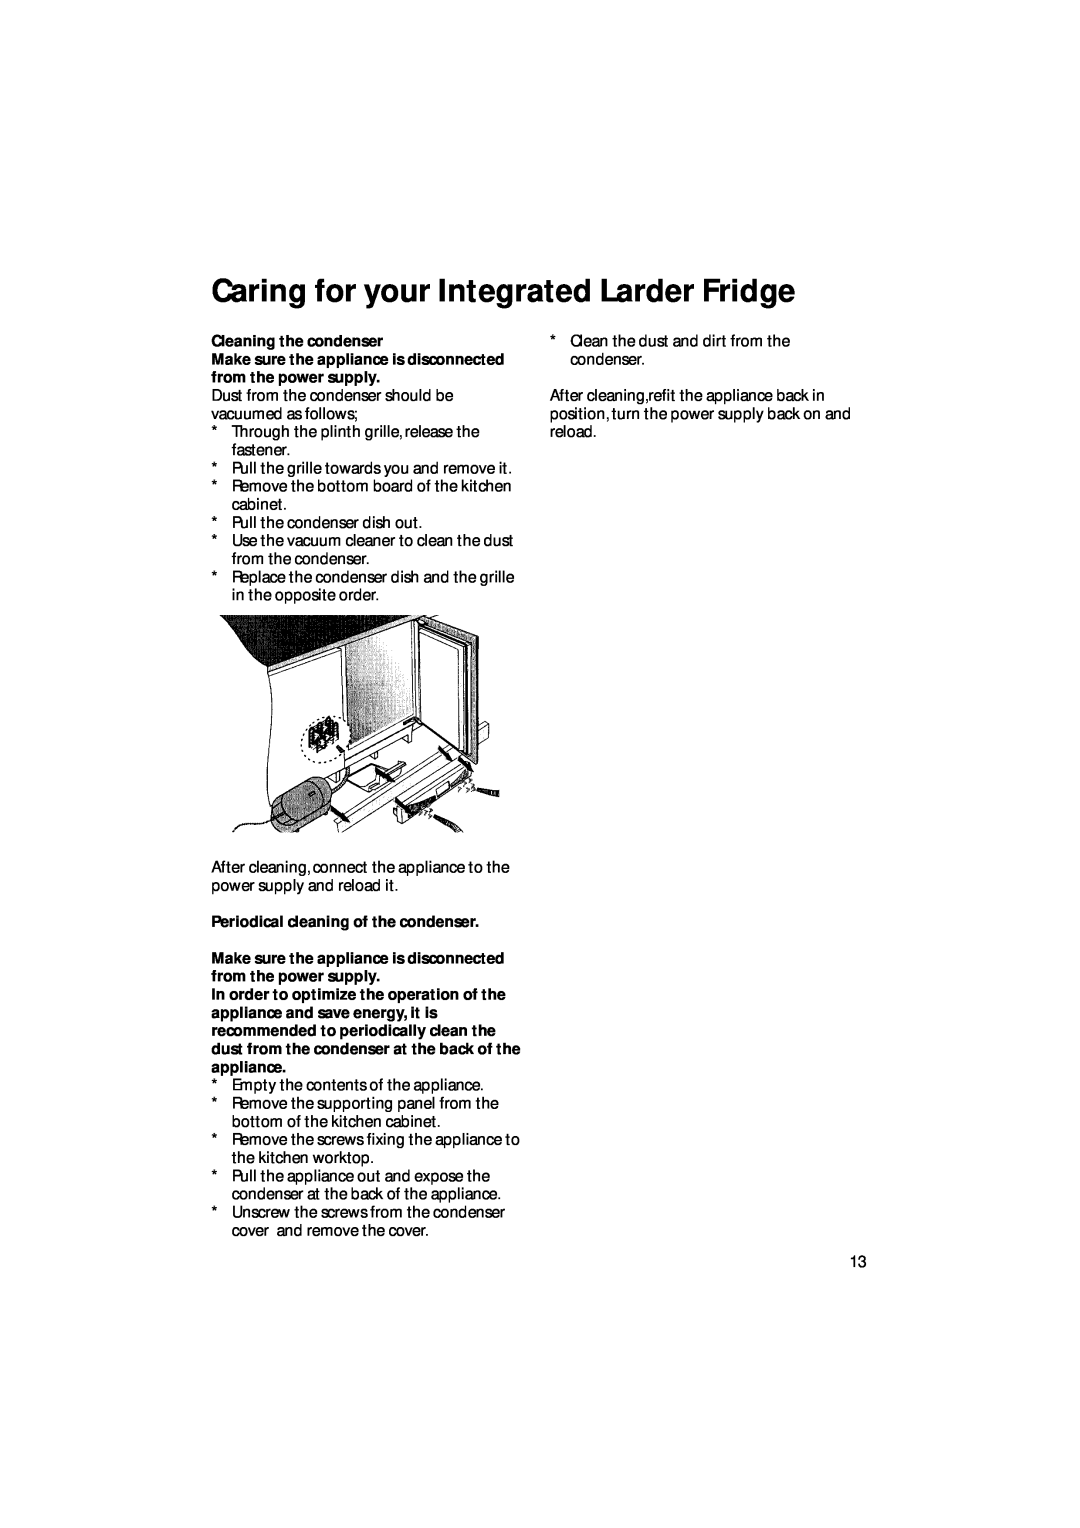 Hotpoint BL31 manual Caring for your Integrated Larder Fridge, Cleaning the condenser, Periodical cleaning of the condenser 